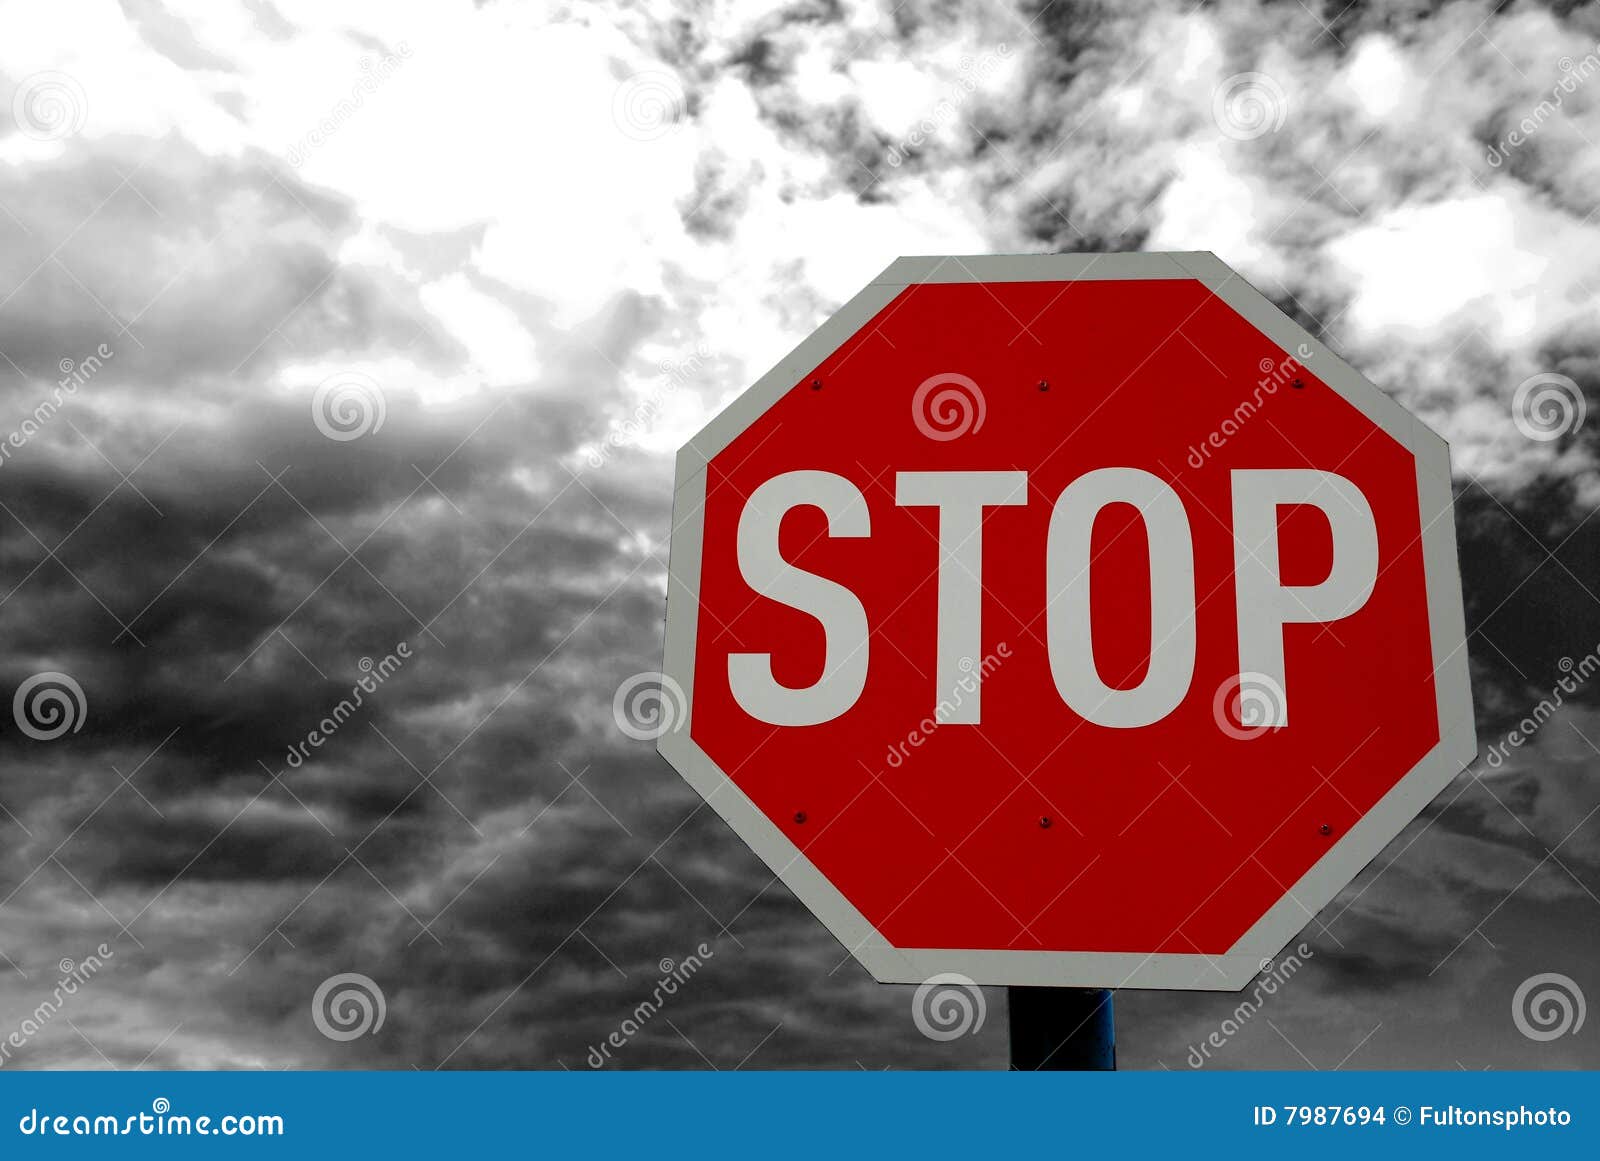 stop road traffic sign